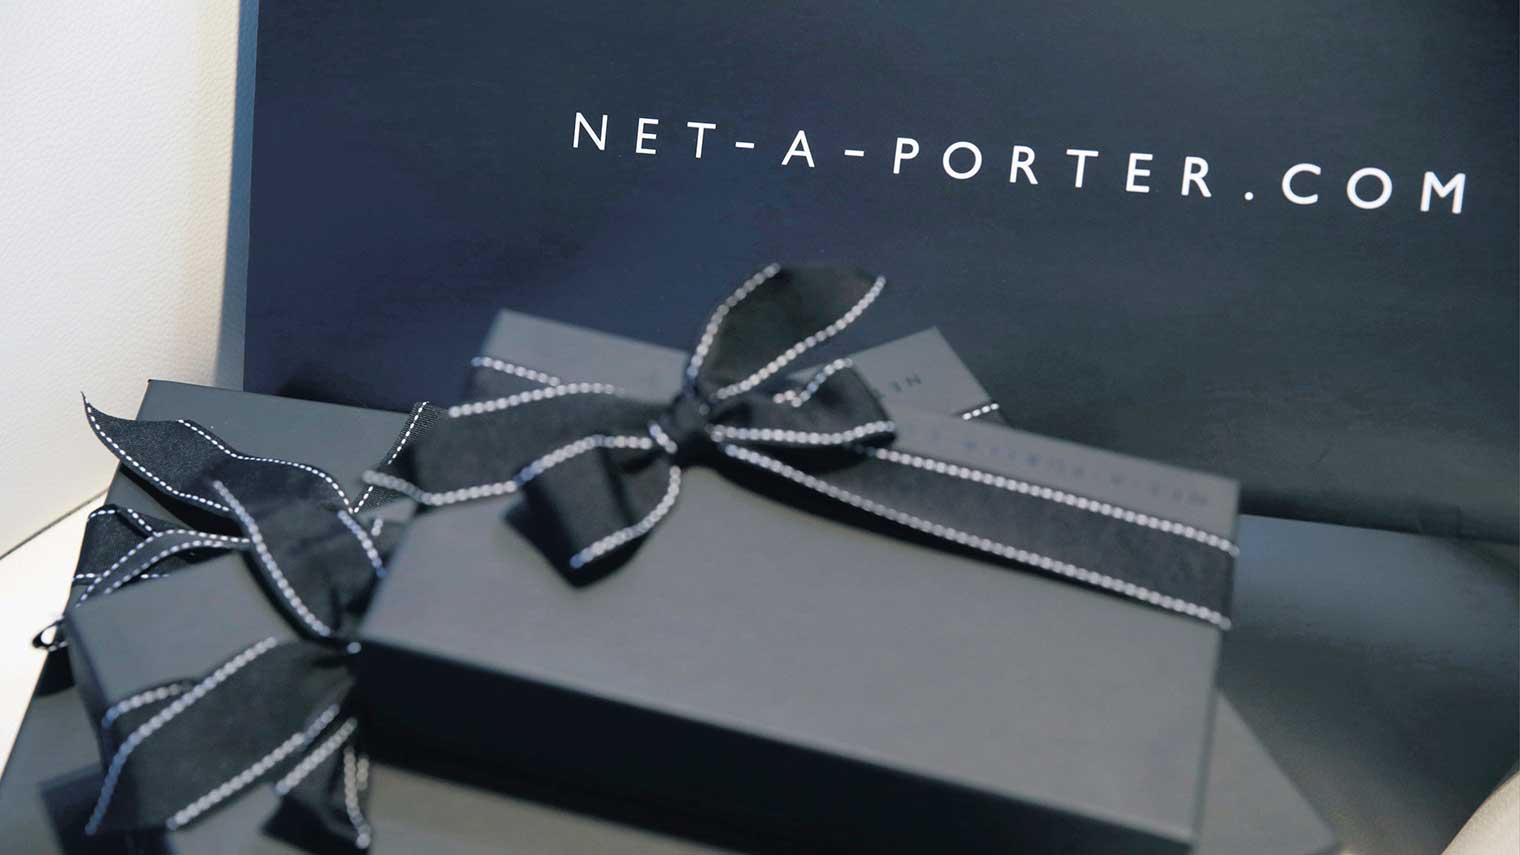 Yoox Net-A-Porter appoints global operations director